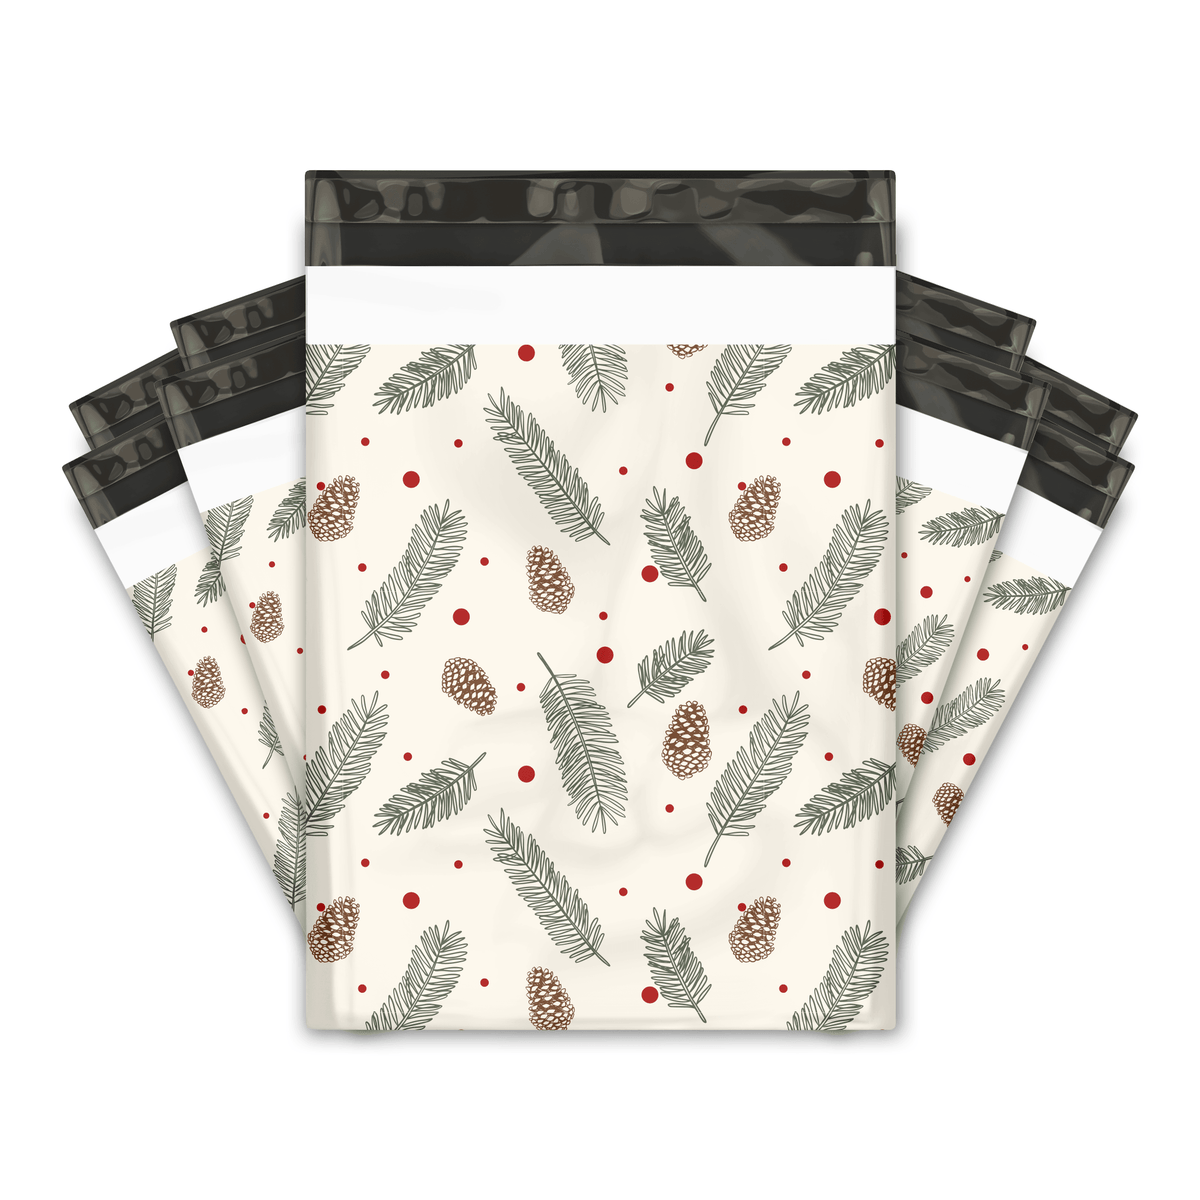 Pinecones Designer Poly Mailers Shipping Envelopes Premium Printed Bags Pro Supply Global